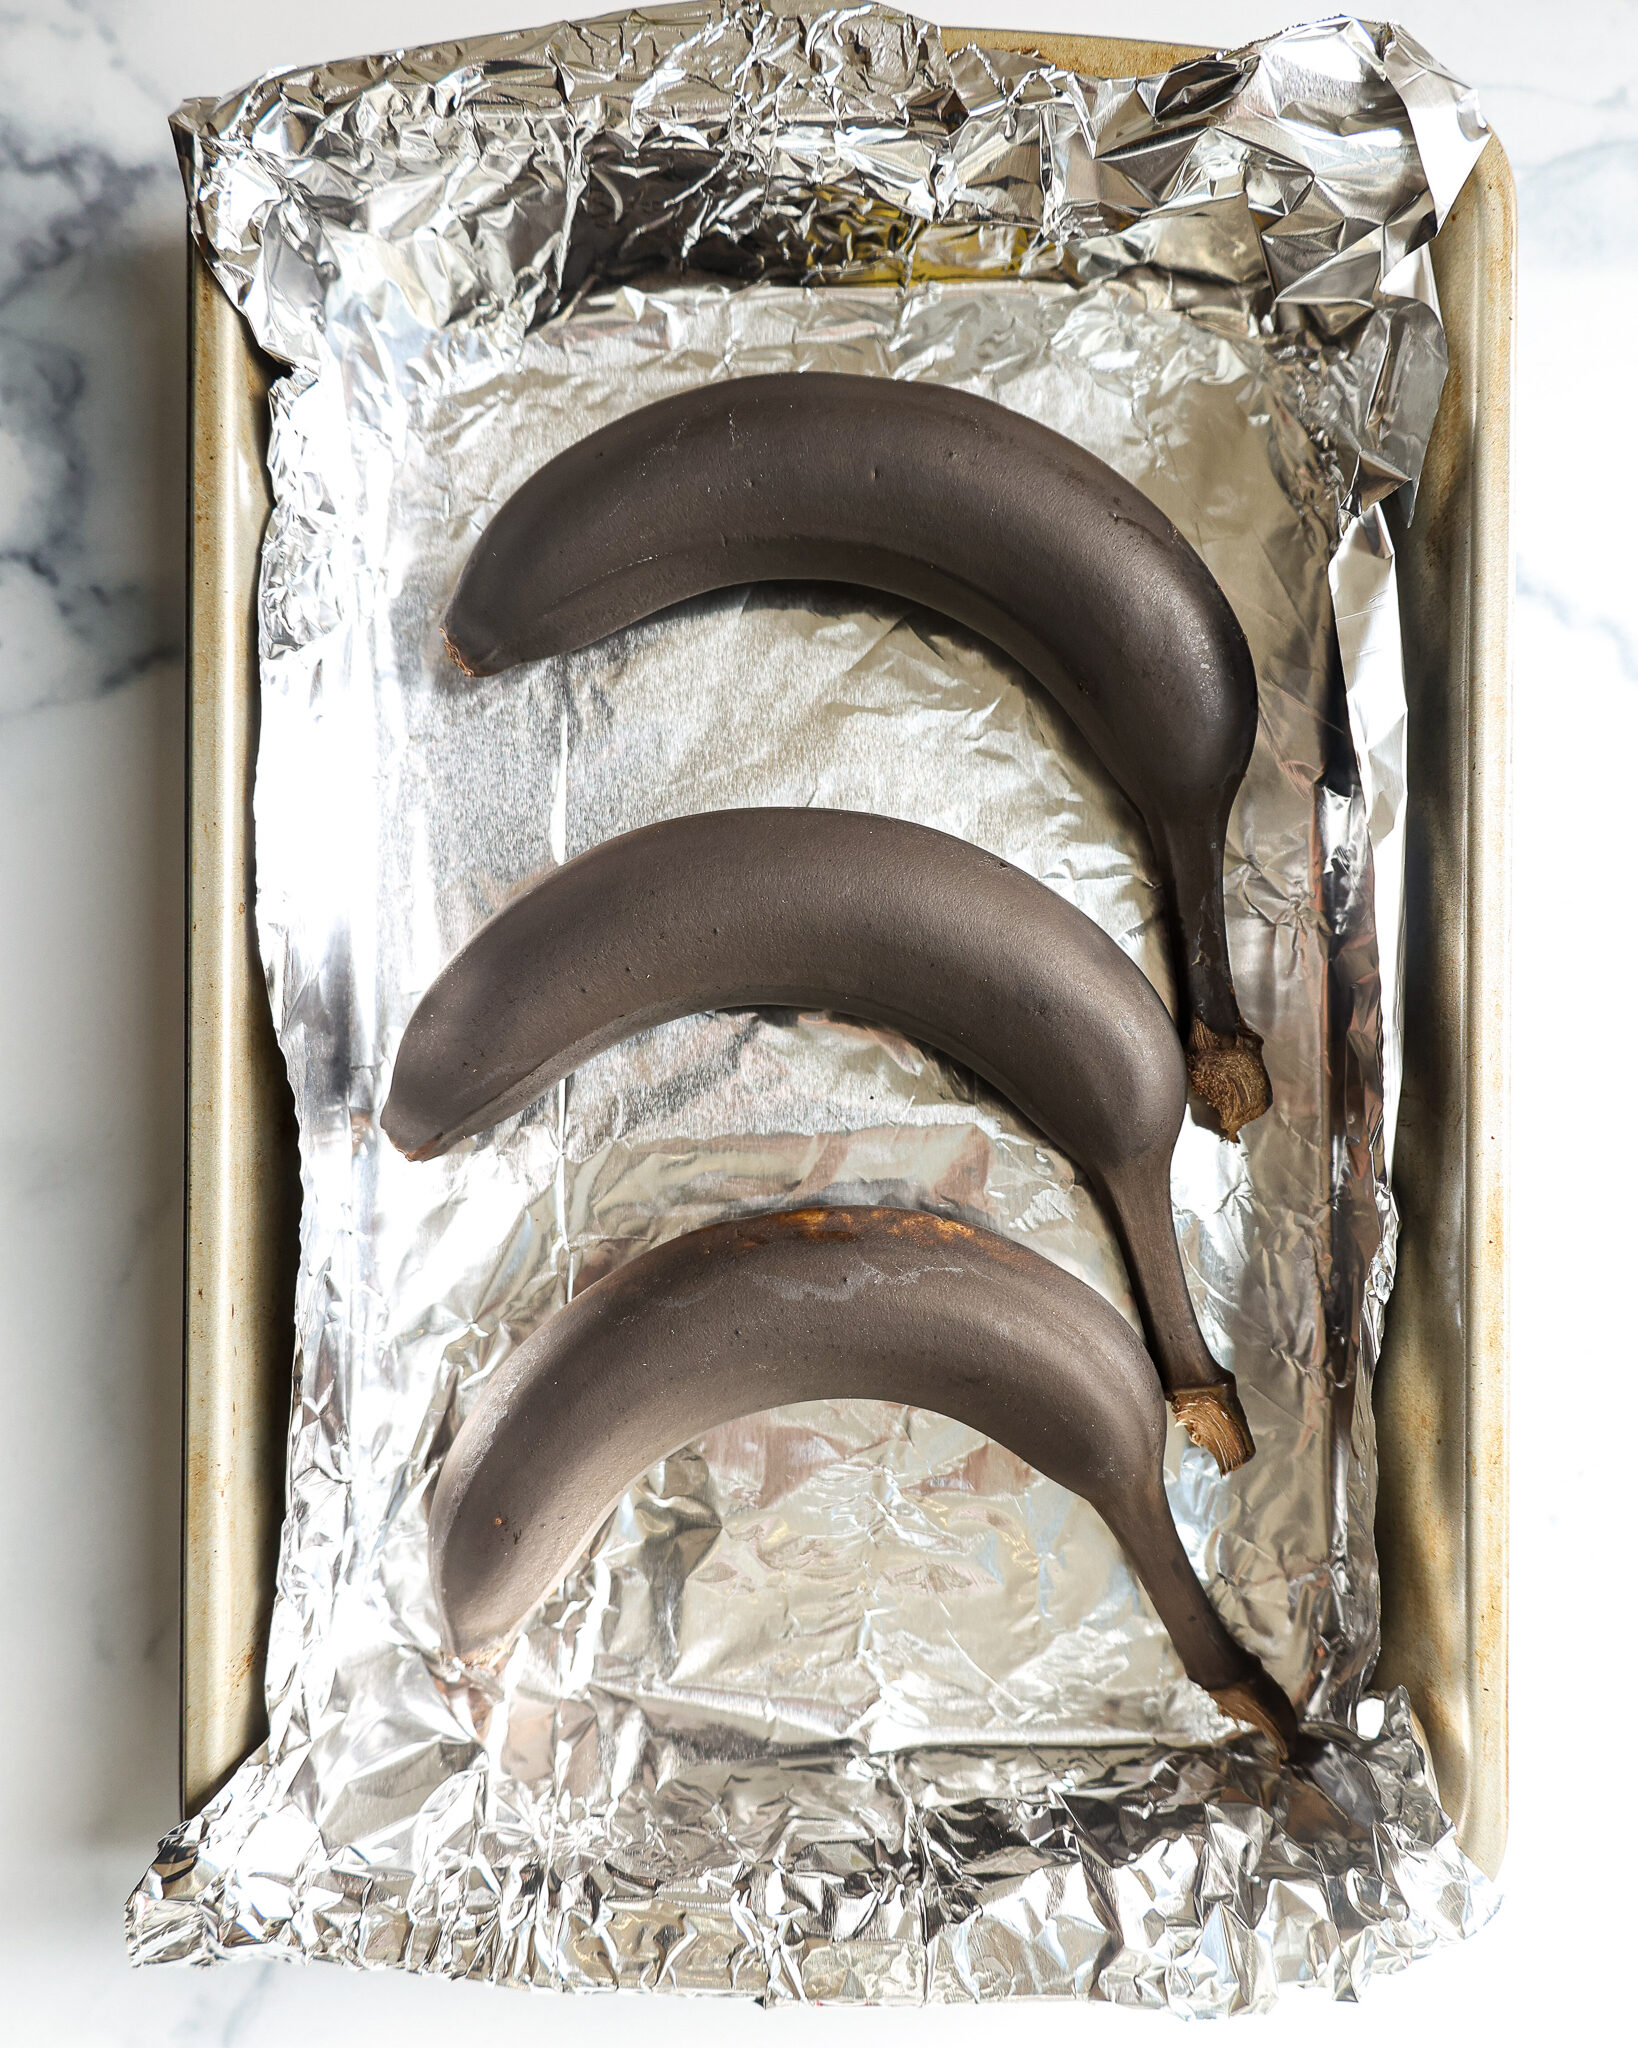 image of unripe bananas that have been placed on a foil lined baking sheet to be quickly ripened by being baked the oven